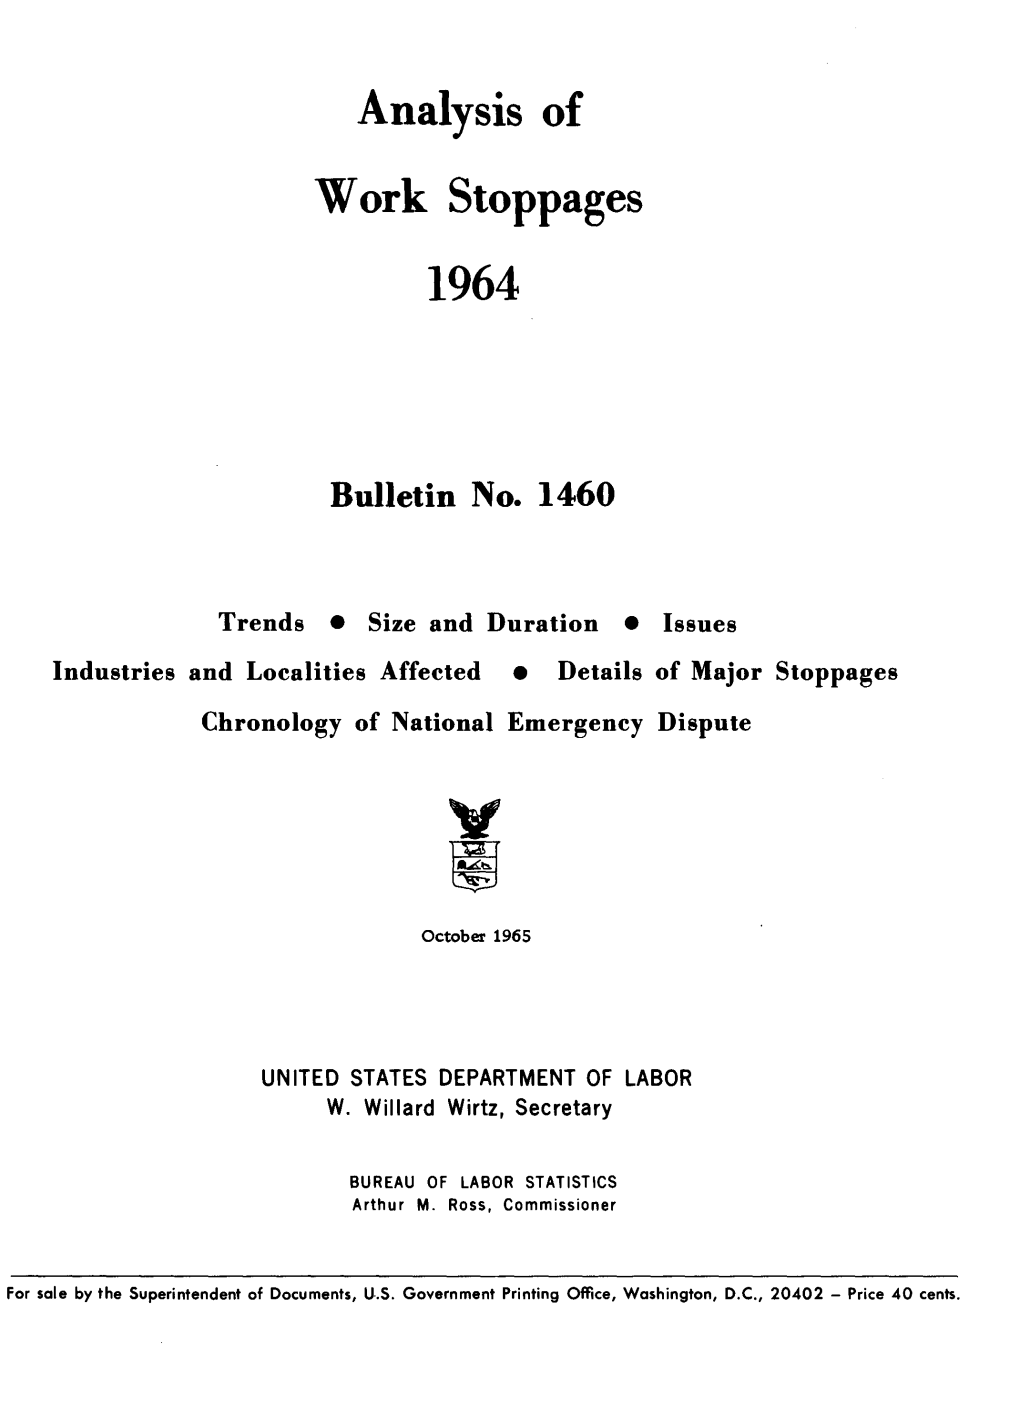 Analysis of Work Stoppages 1964